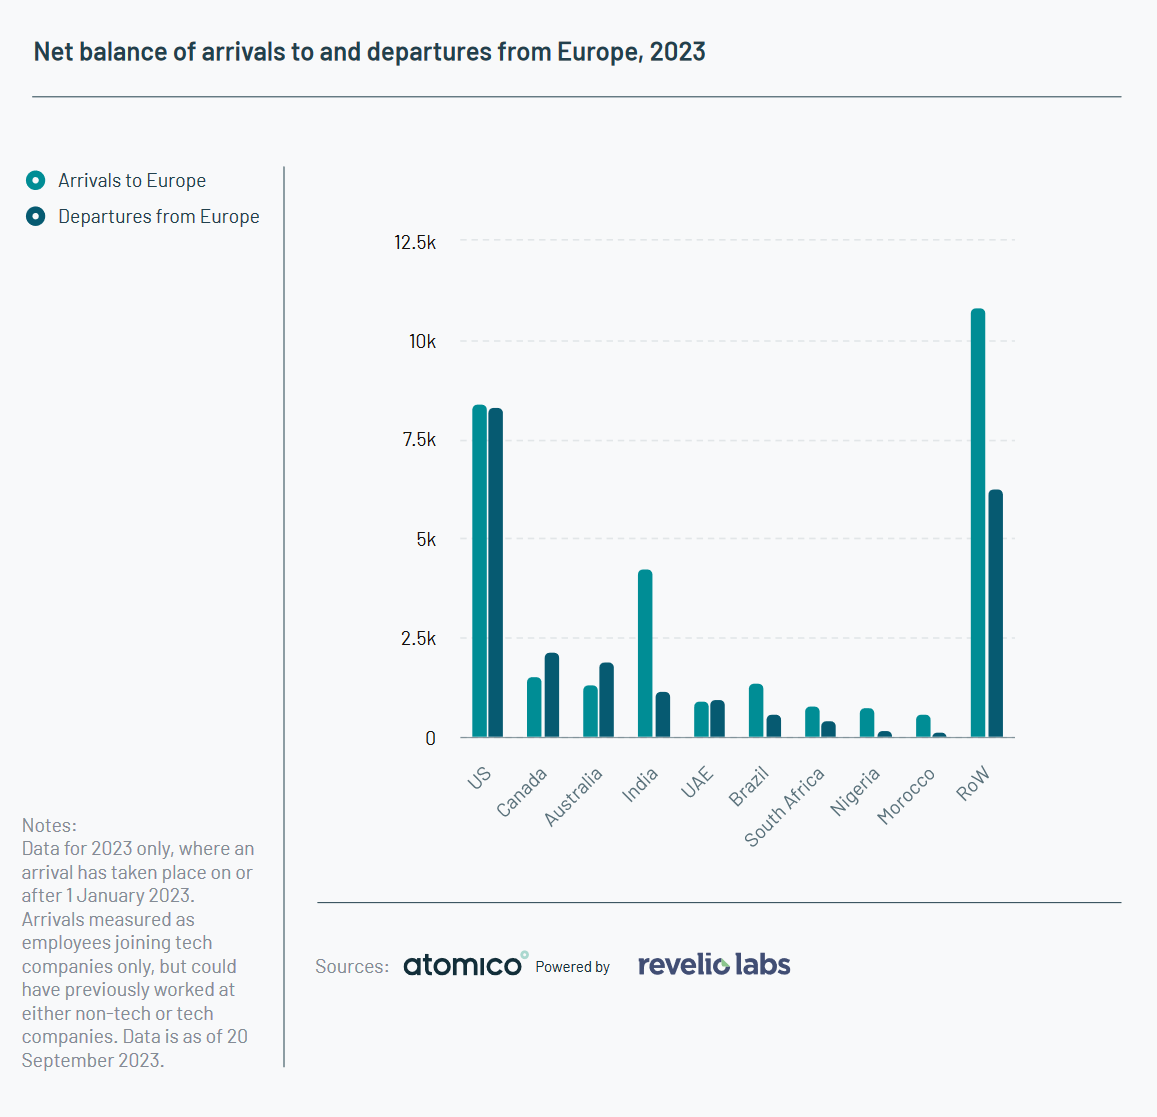 Net balance of arrivals to and departures from Europe, 2023